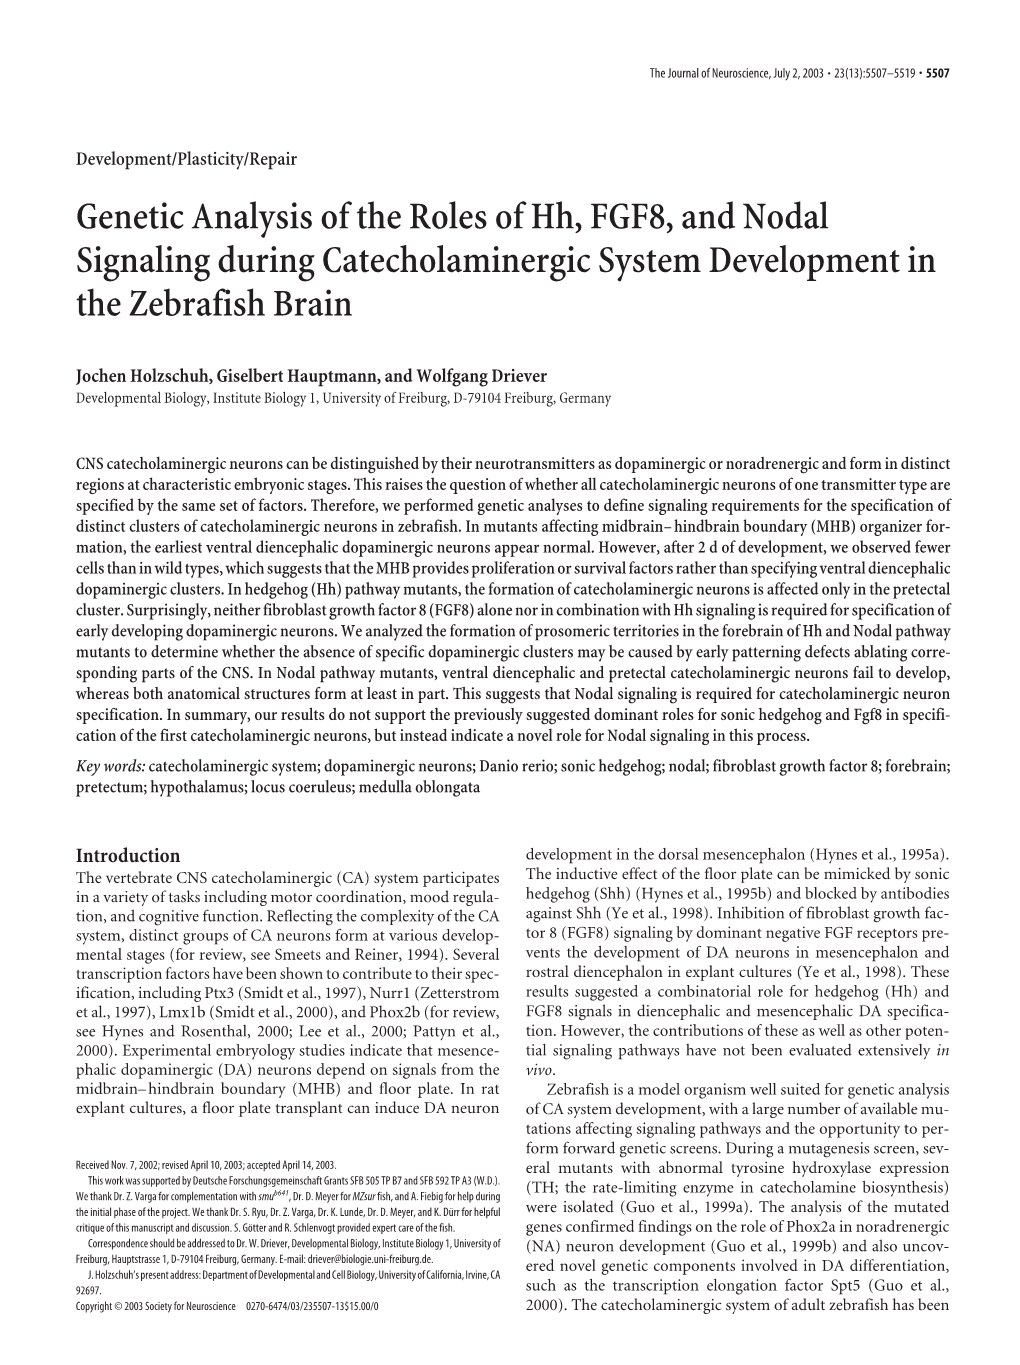 Genetic Analysis of the Roles of Hh, FGF8, and Nodal Signaling During Catecholaminergic System Development in the Zebrafish Brain